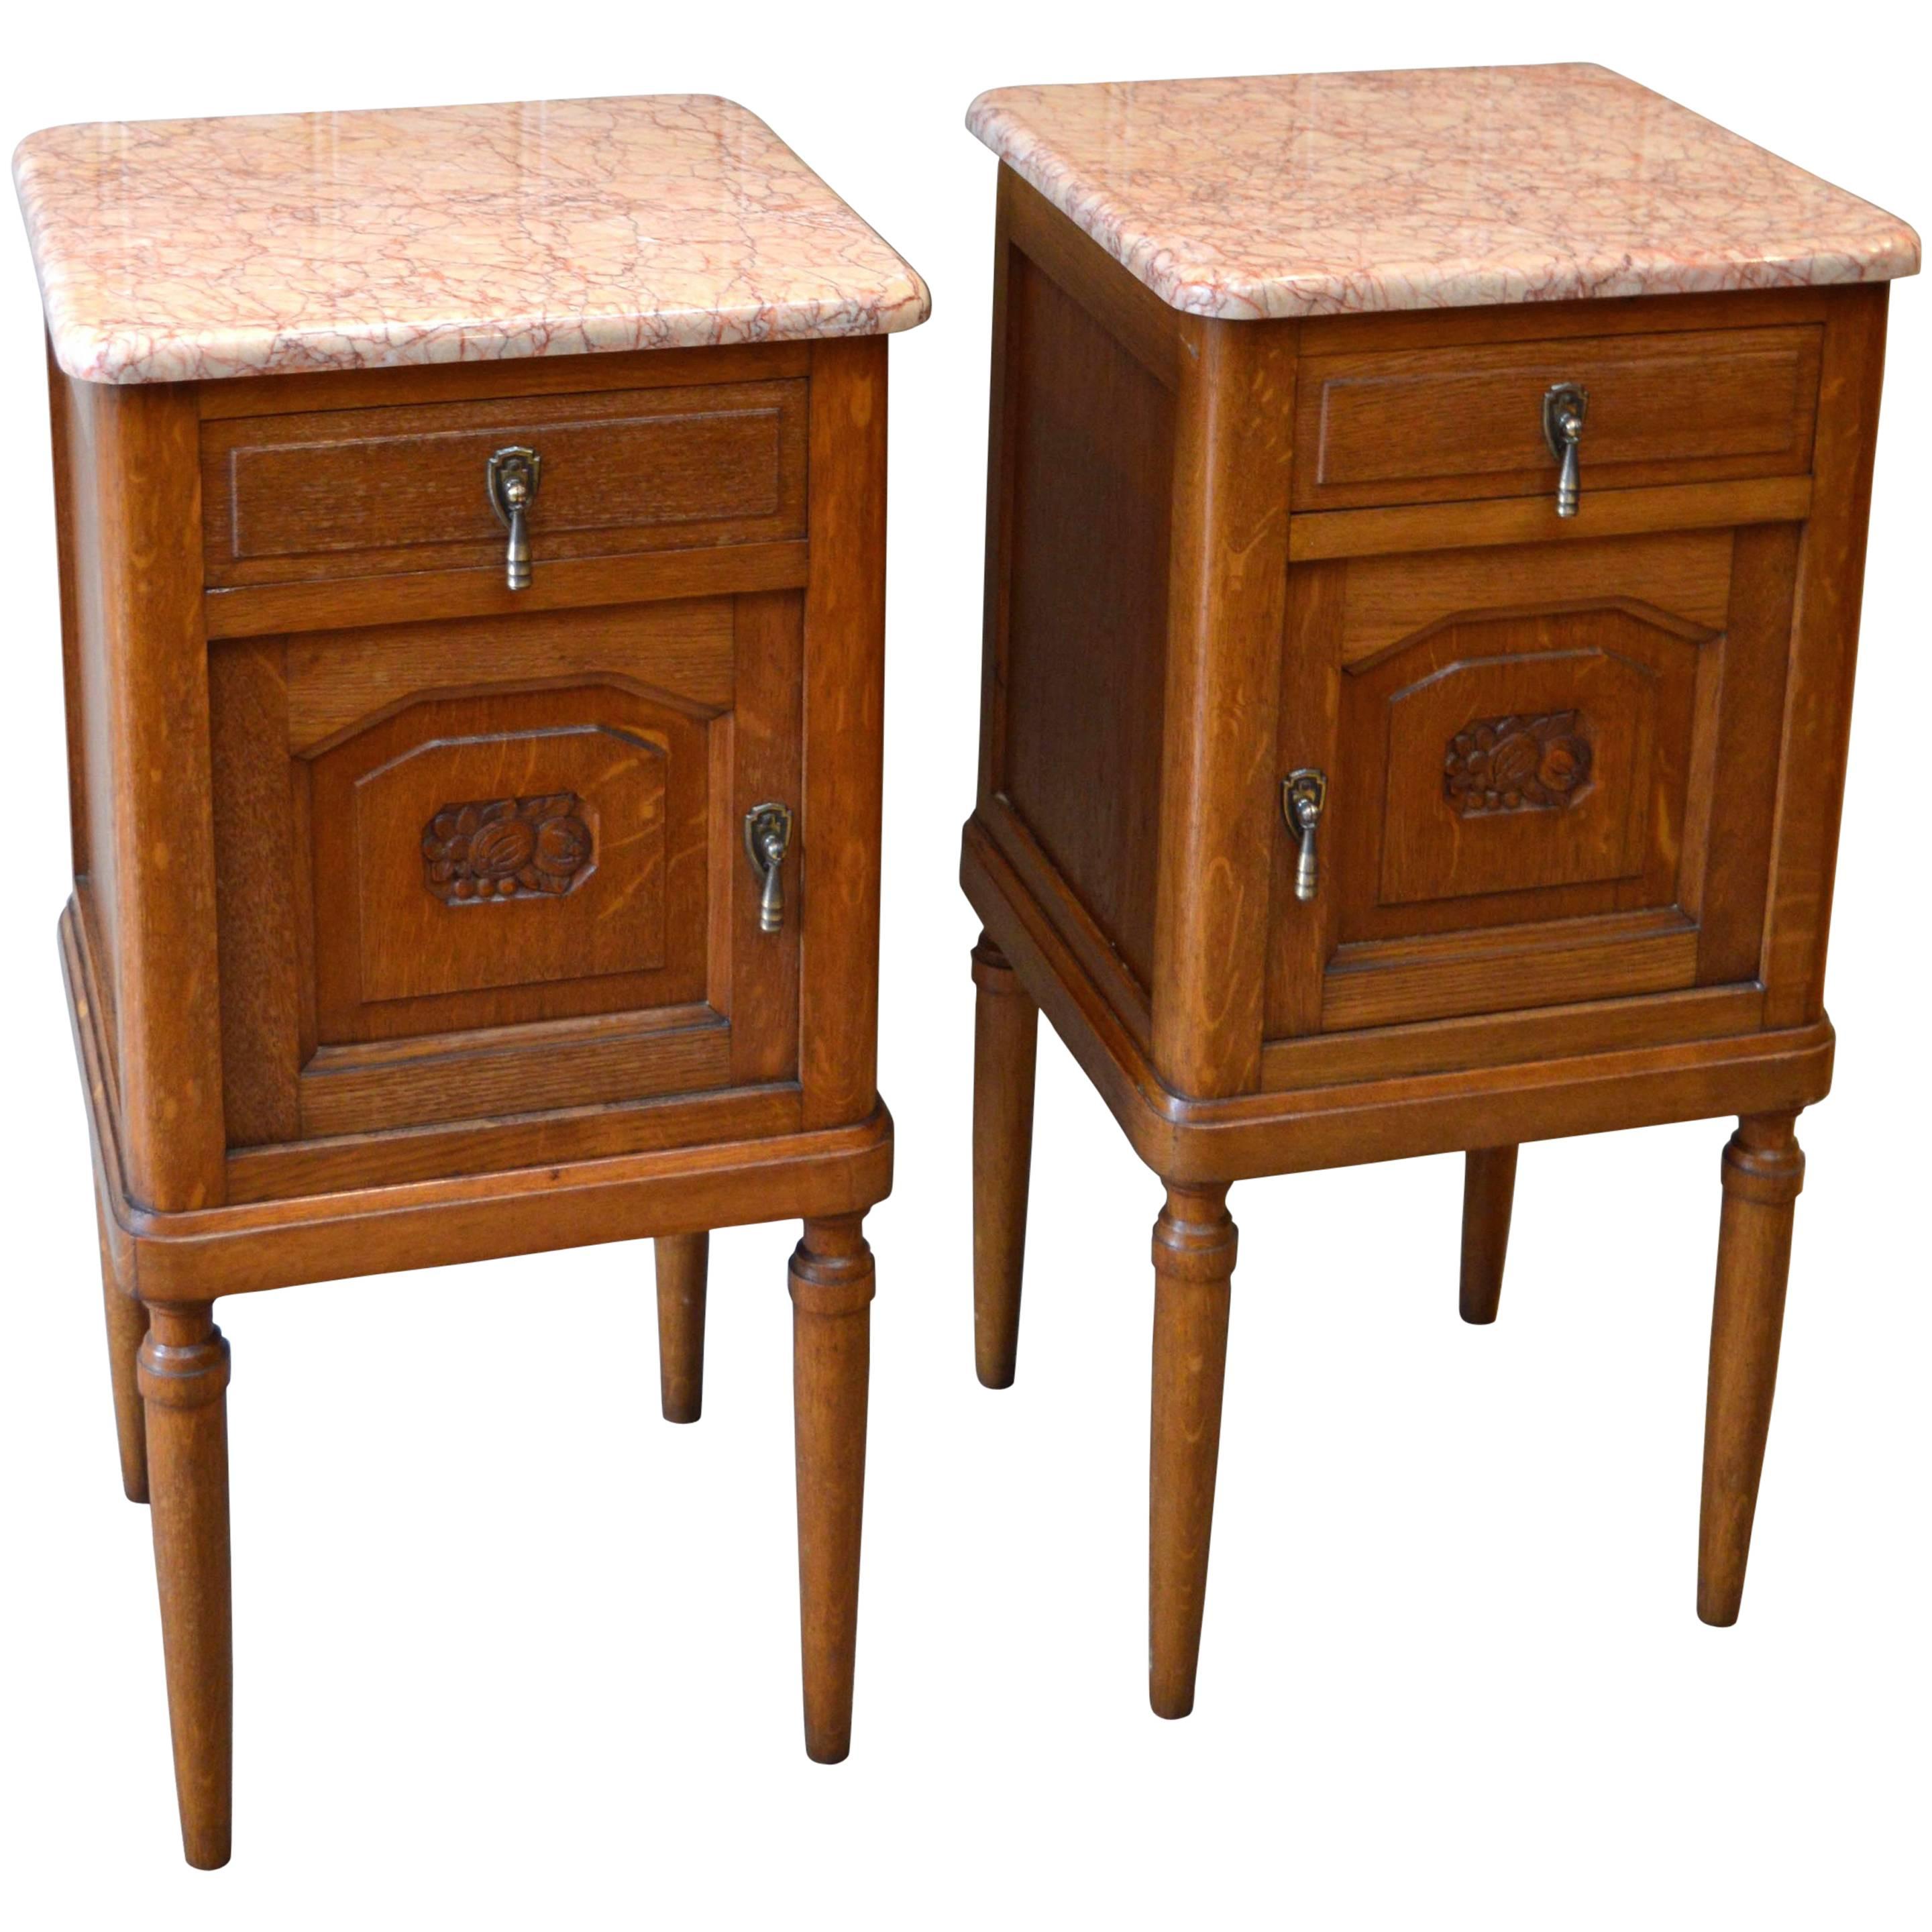 Pair of Oak Marble-Top Bedside Cabinets